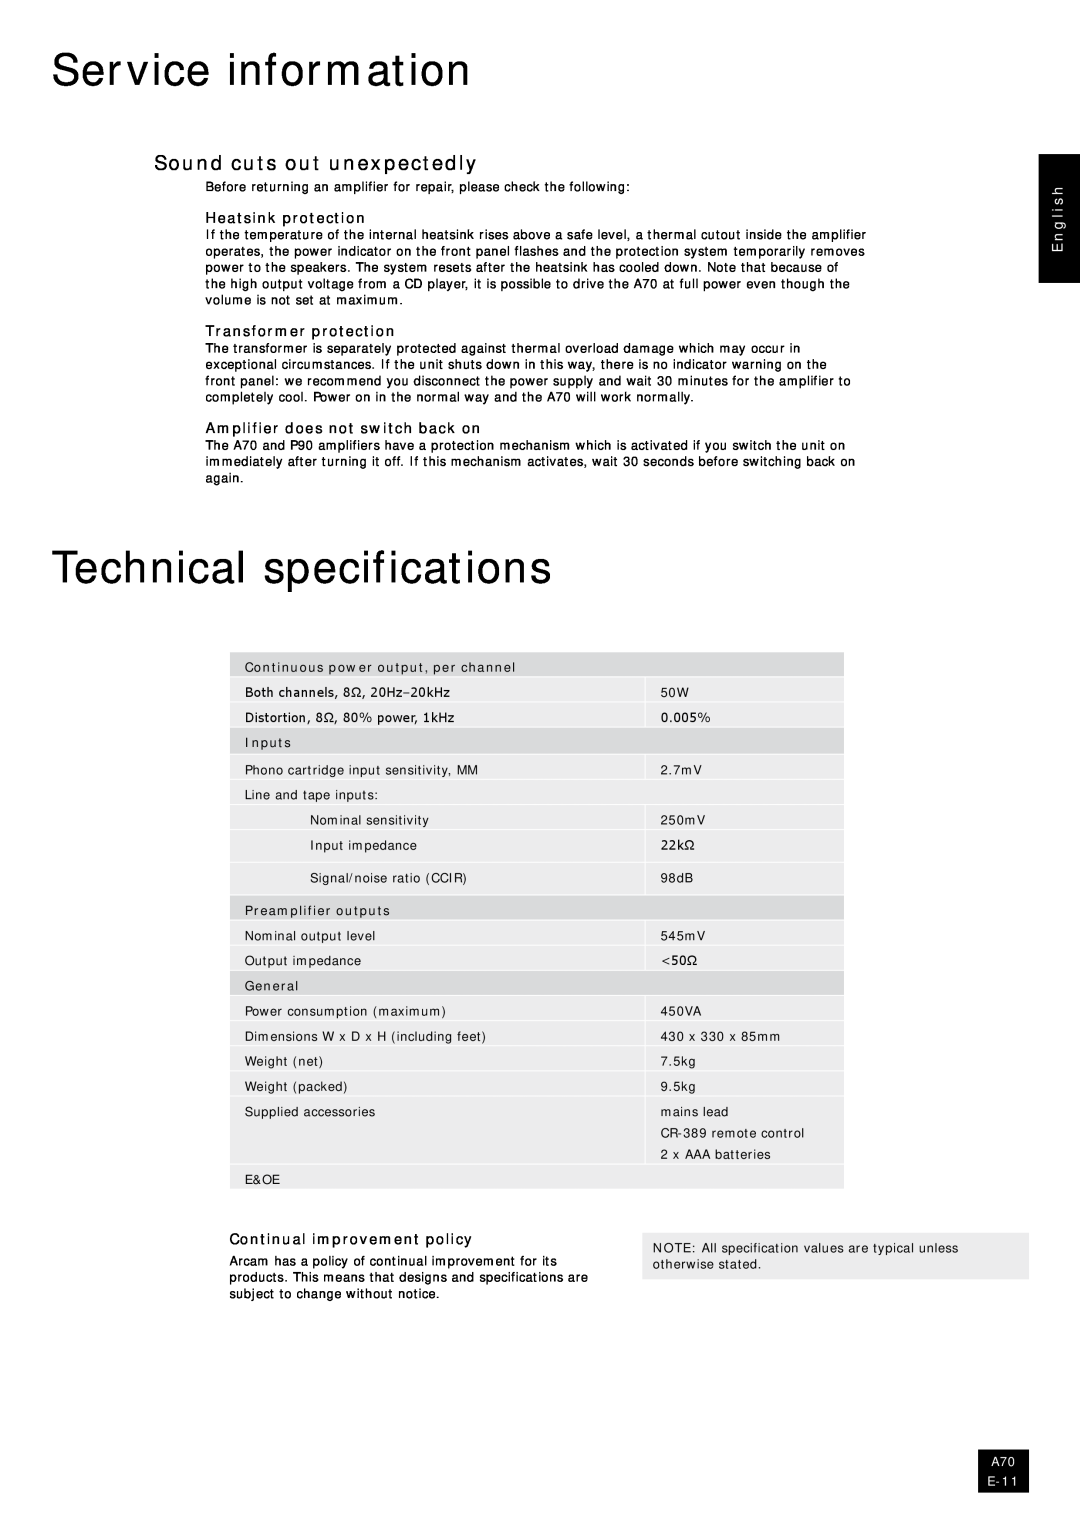 Arcam A70 Service information, Technical specifications, Sound cuts out unexpectedly, Heatsink protection, English, Inputs 